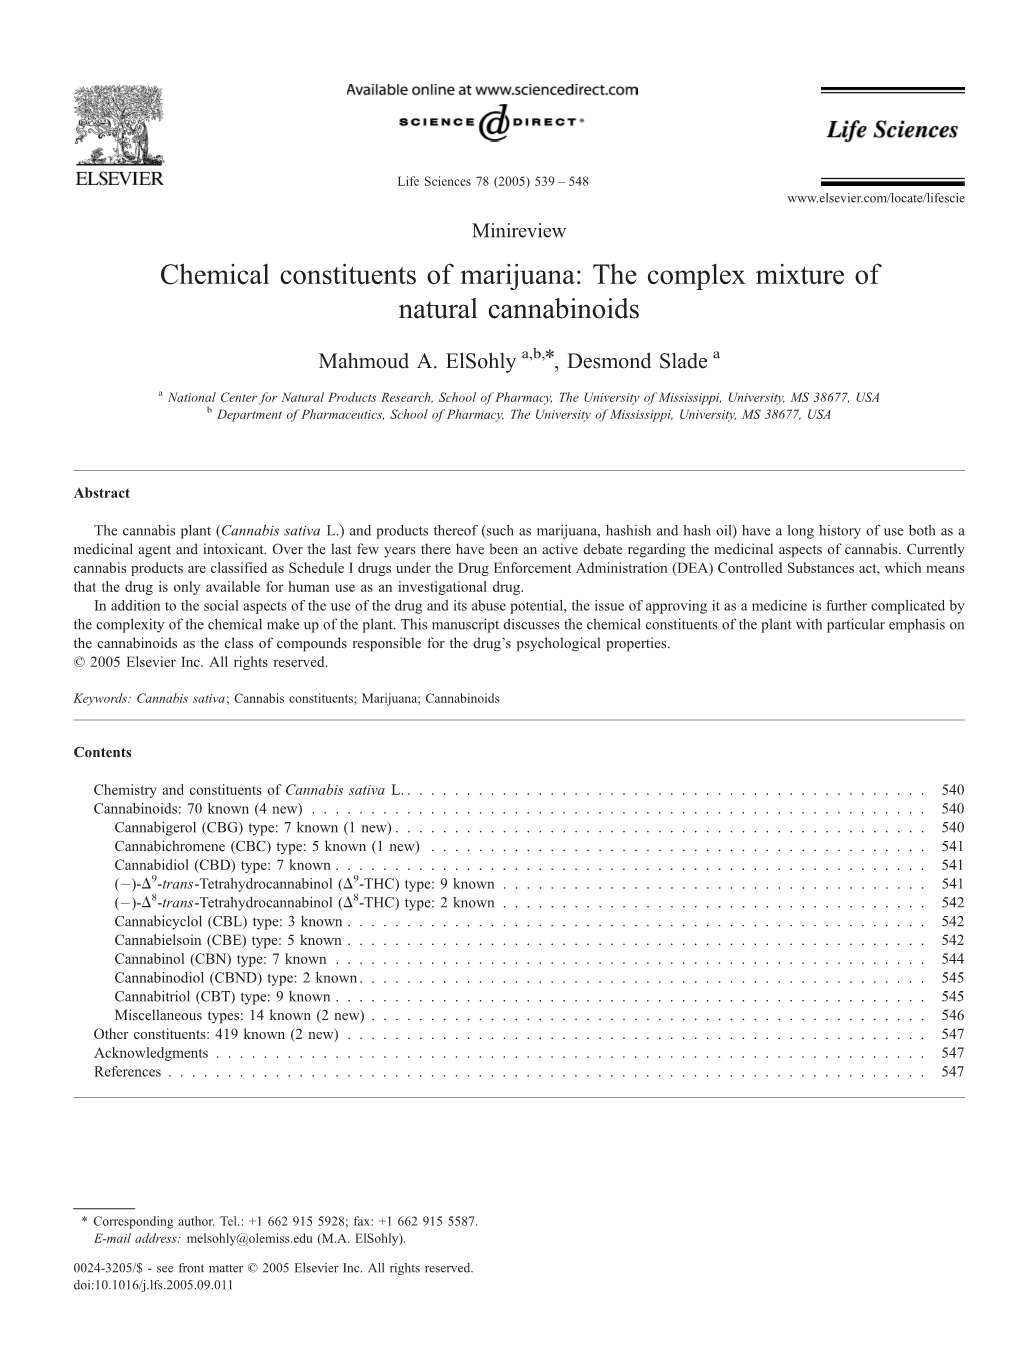 Chemical Constituents of Marijuana: the Complex Mixture of Natural Cannabinoids